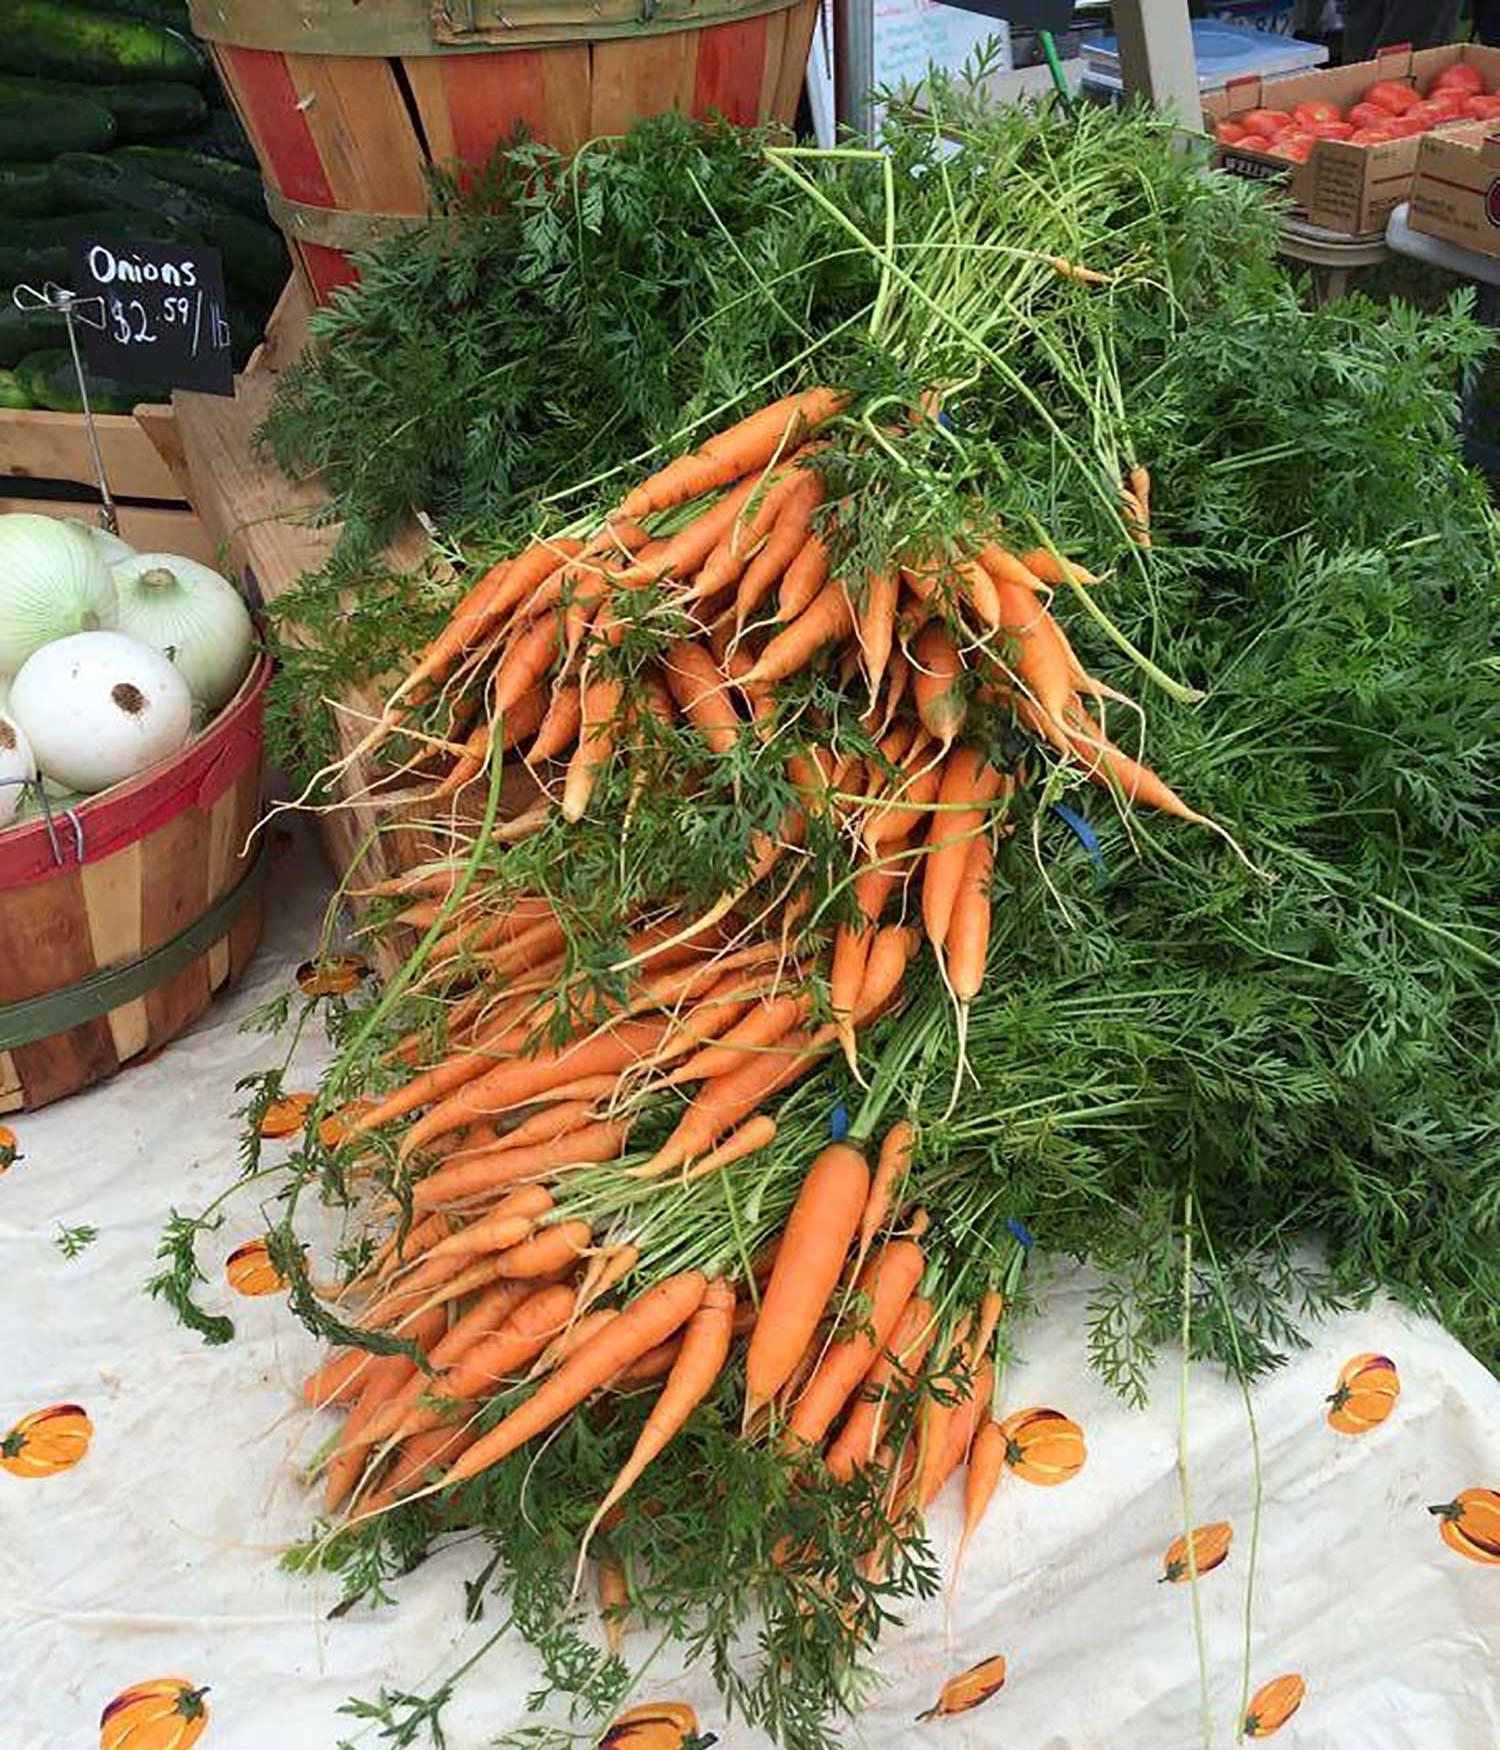 Several bundles of fresh carrots on display at a farmers market.